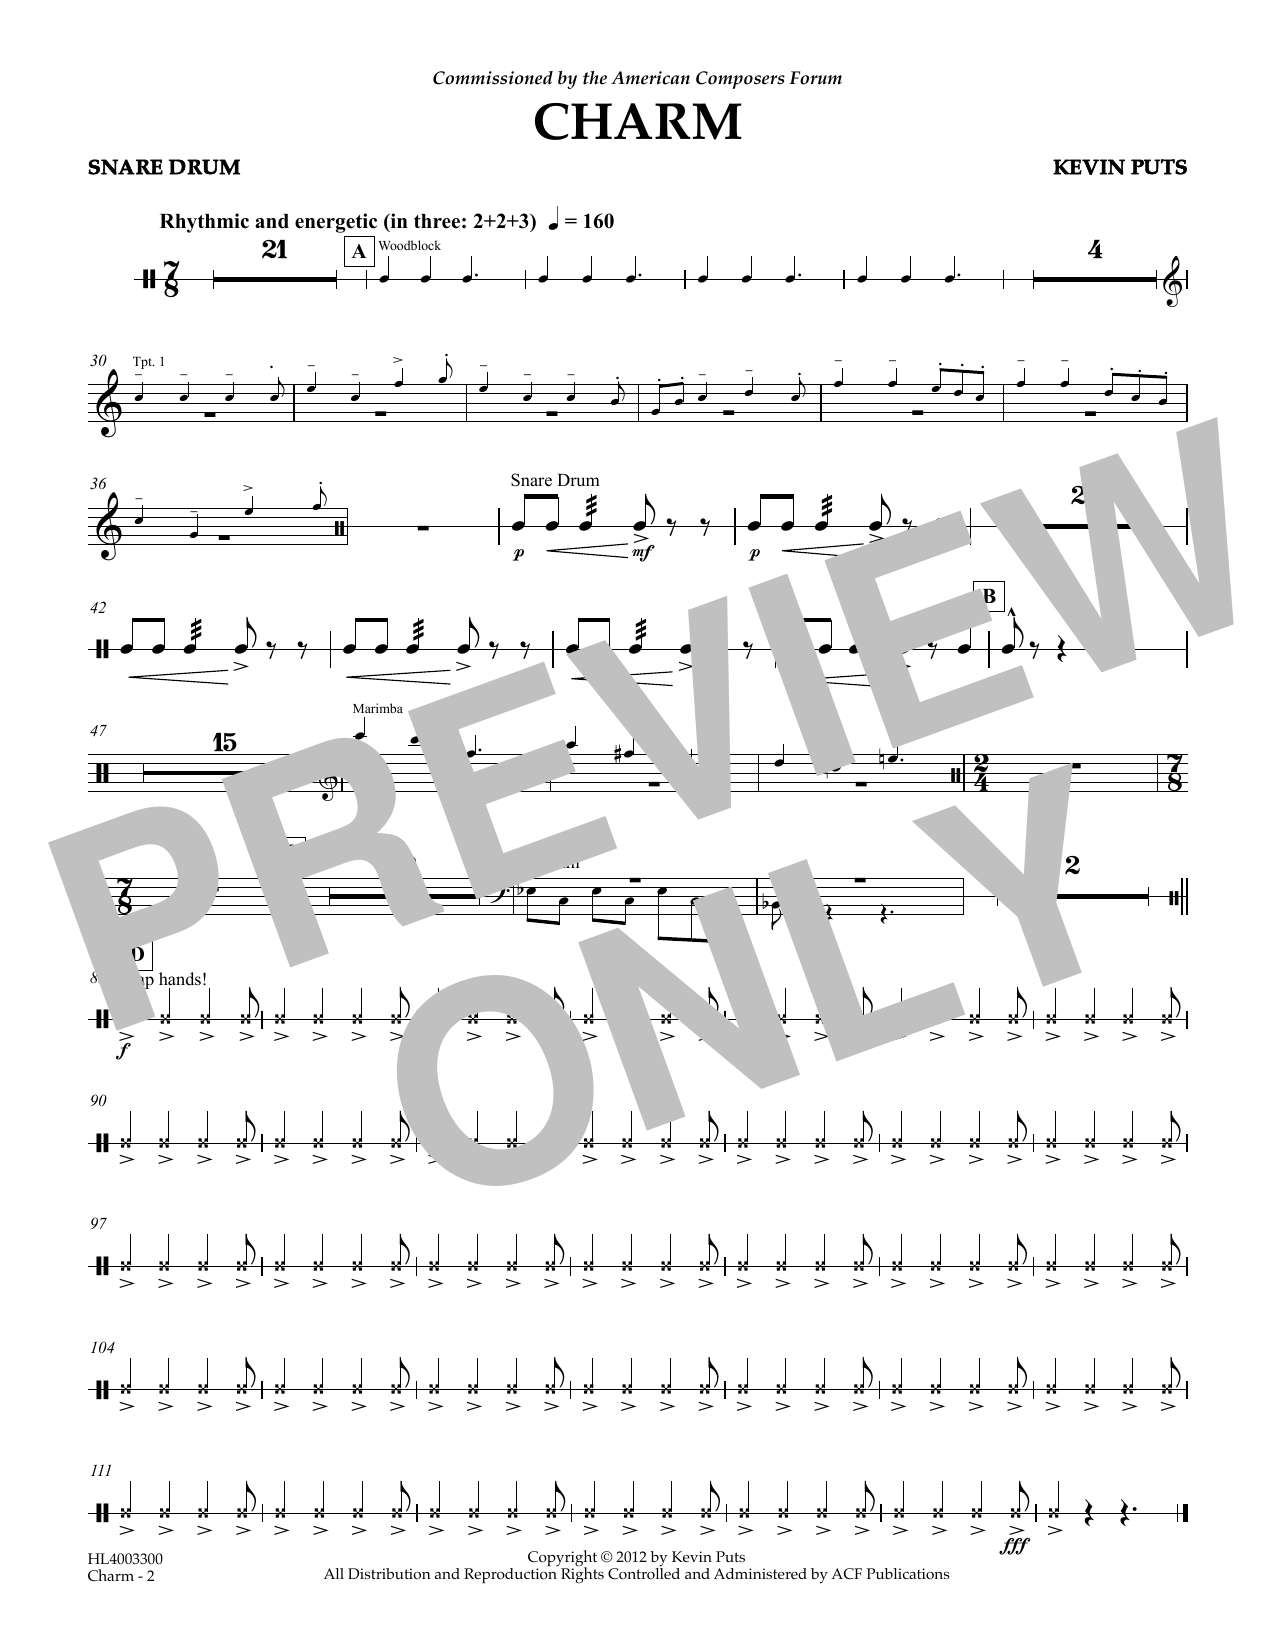 Download Kevin Puts Charm - Snare Drum Sheet Music